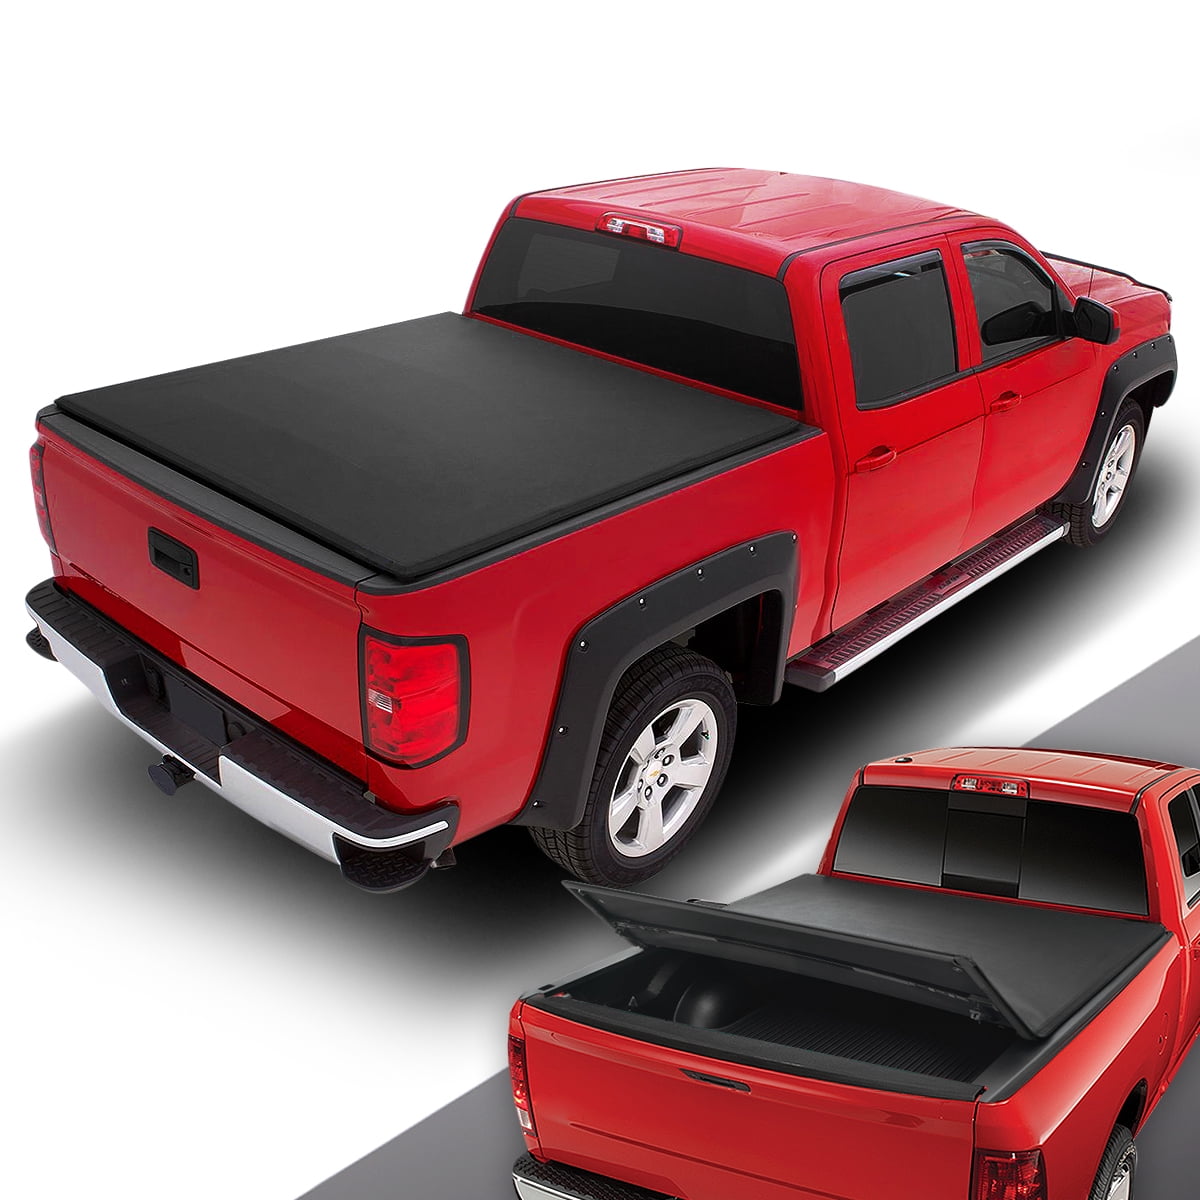 TruXedo TruXport Soft Roll Up Truck Bed Tonneau Cover 284101 fits 2005-20 Nissan Frontier 6 bed 